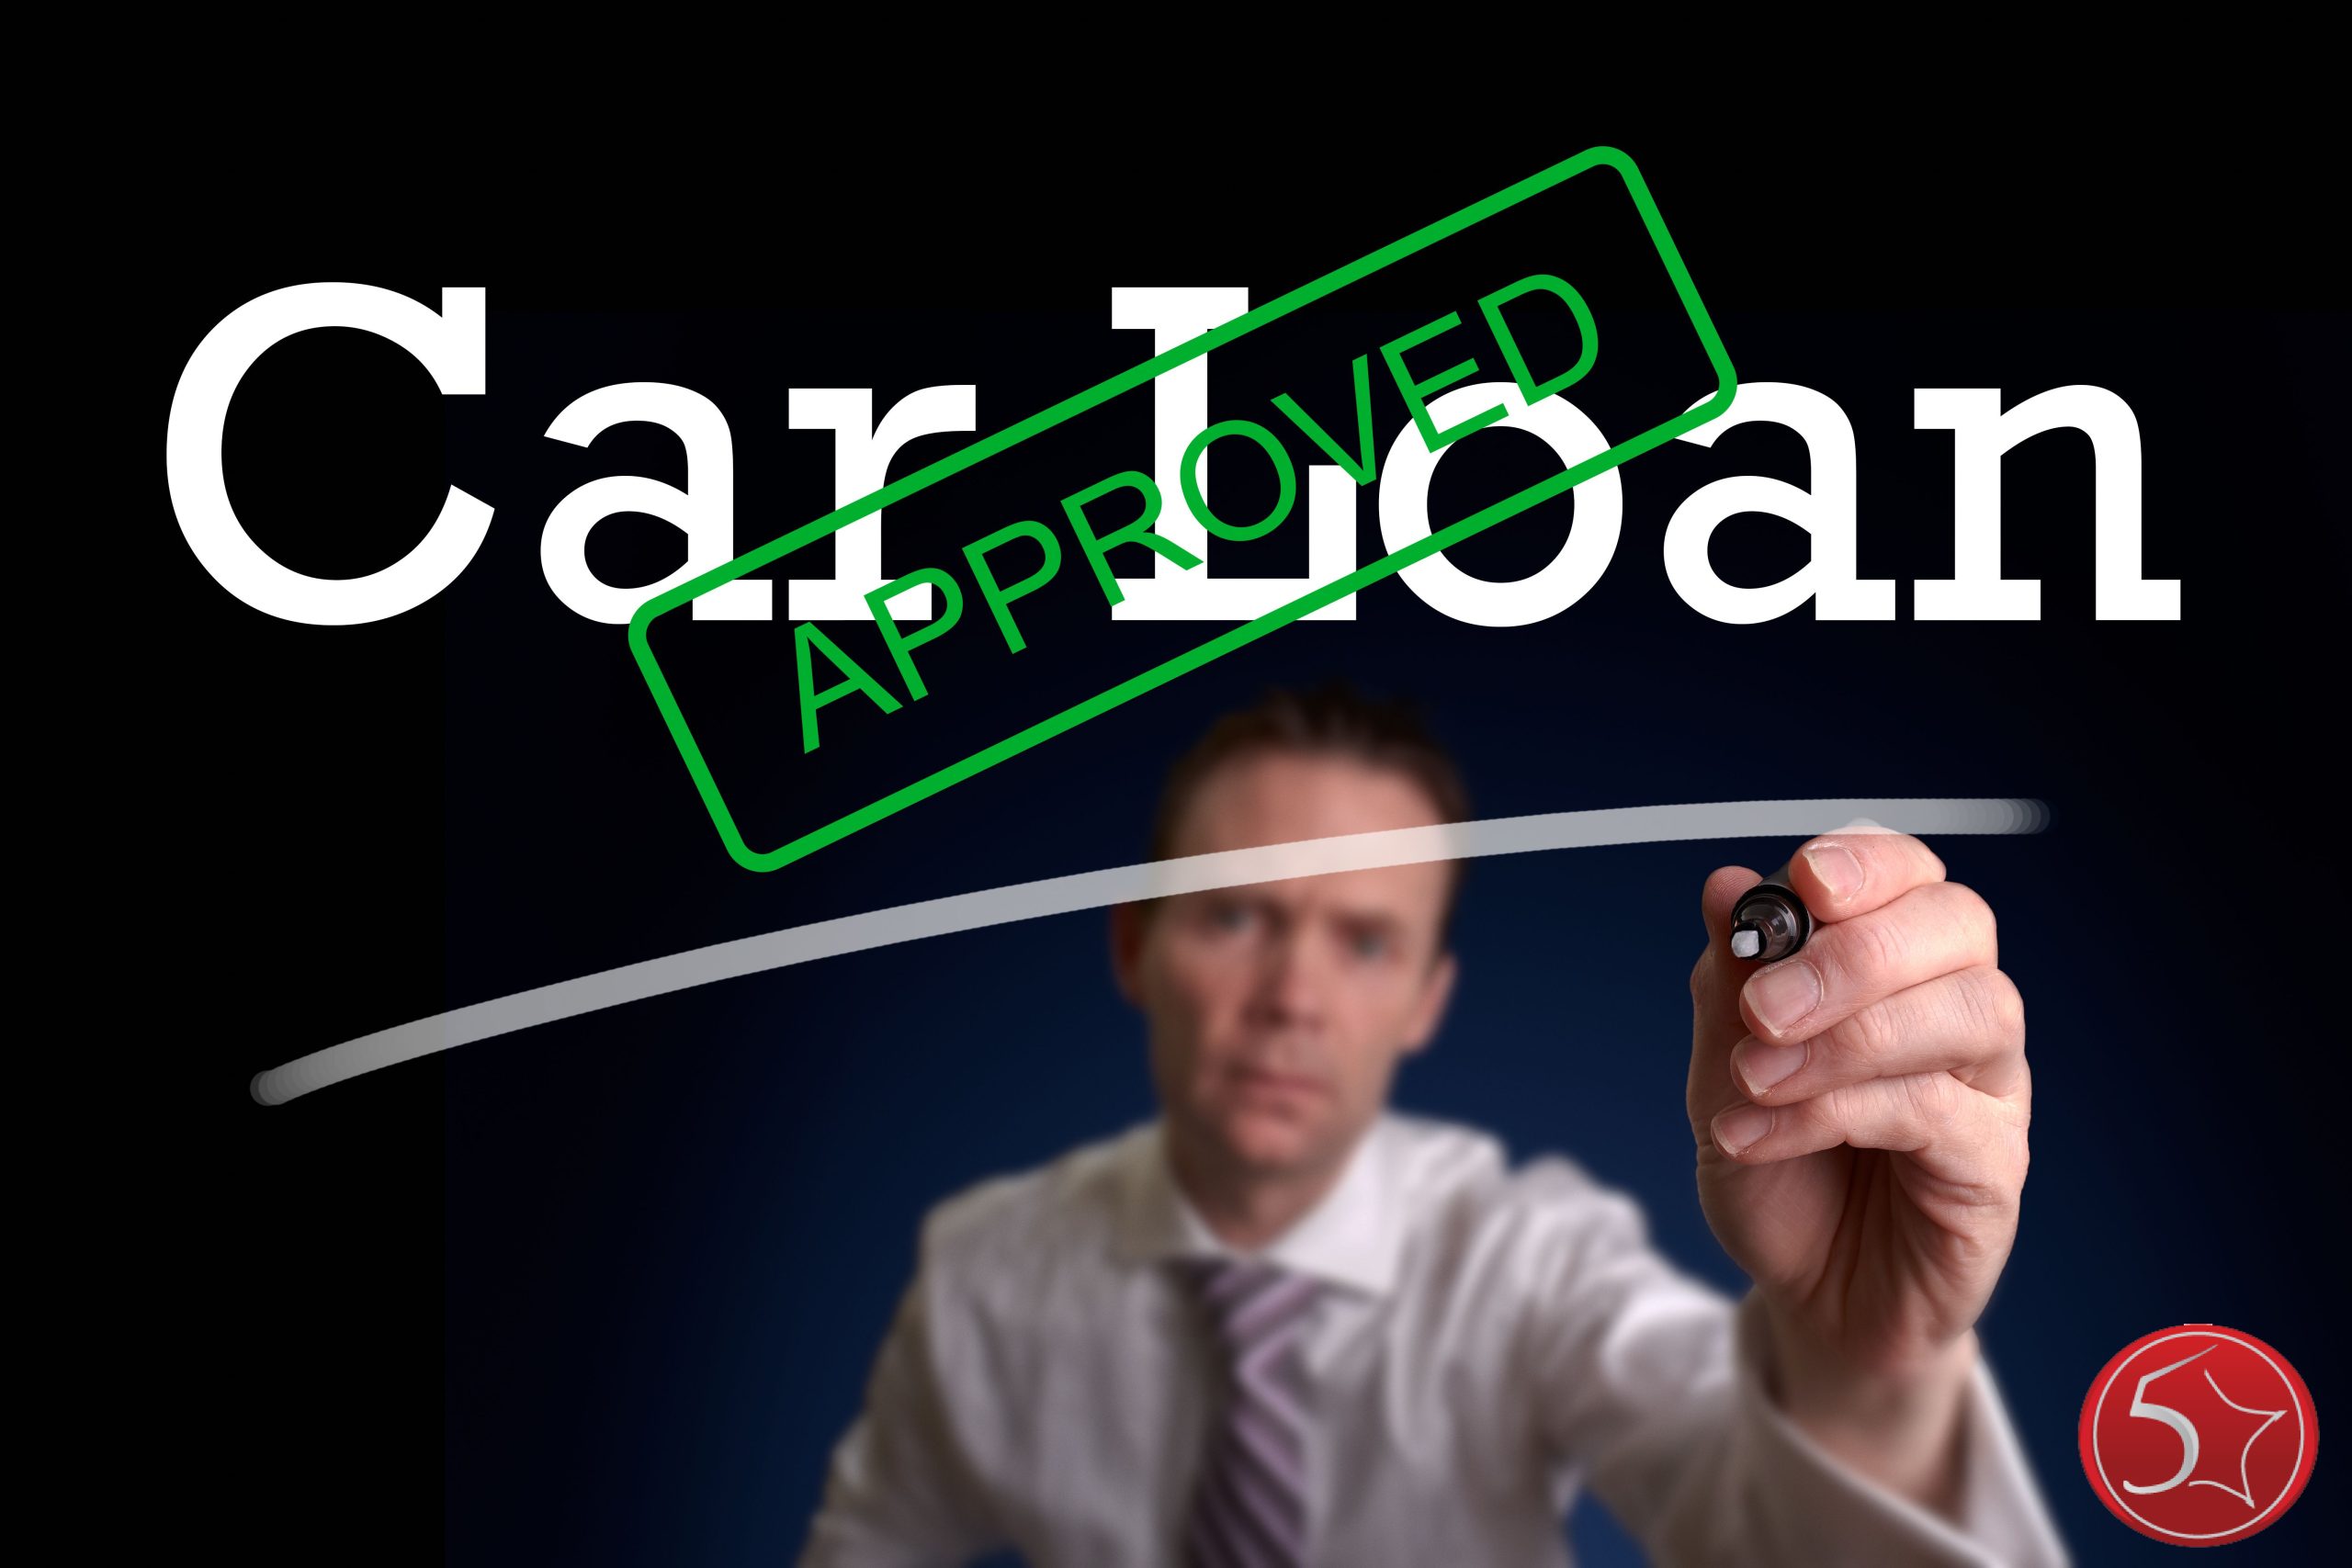 Bad Credit Auto Loans in St. Louis: Get Approved at 5 Star Auto Plaza